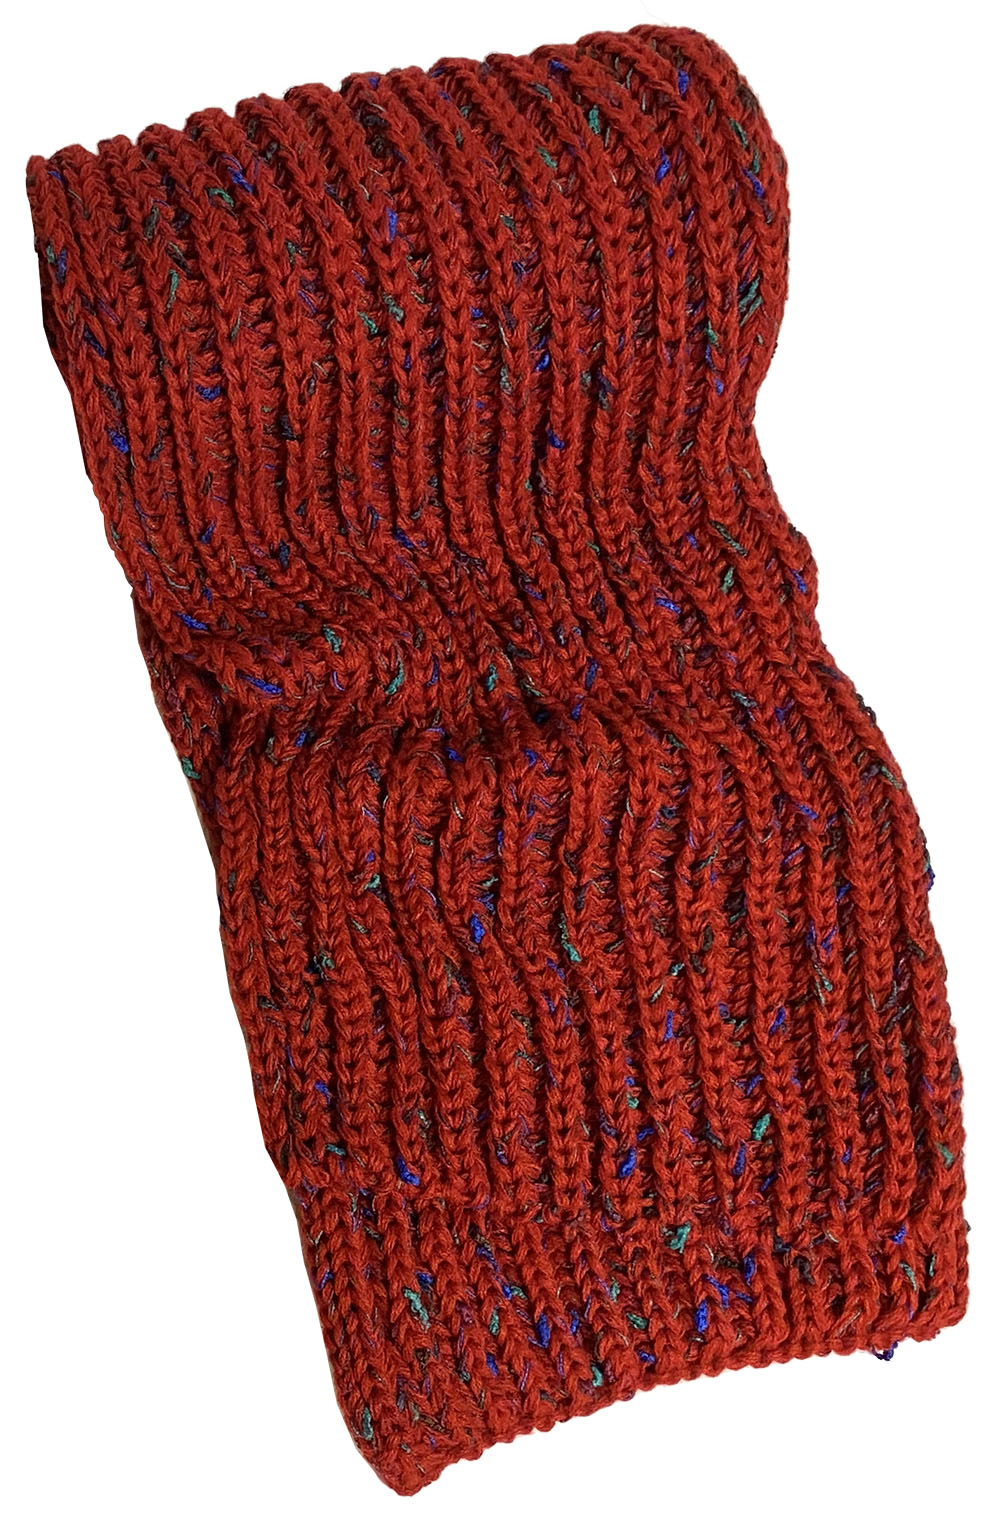 Avalanche Ladies Speckled Chunky Knit Scarf - Scarves & Accessories